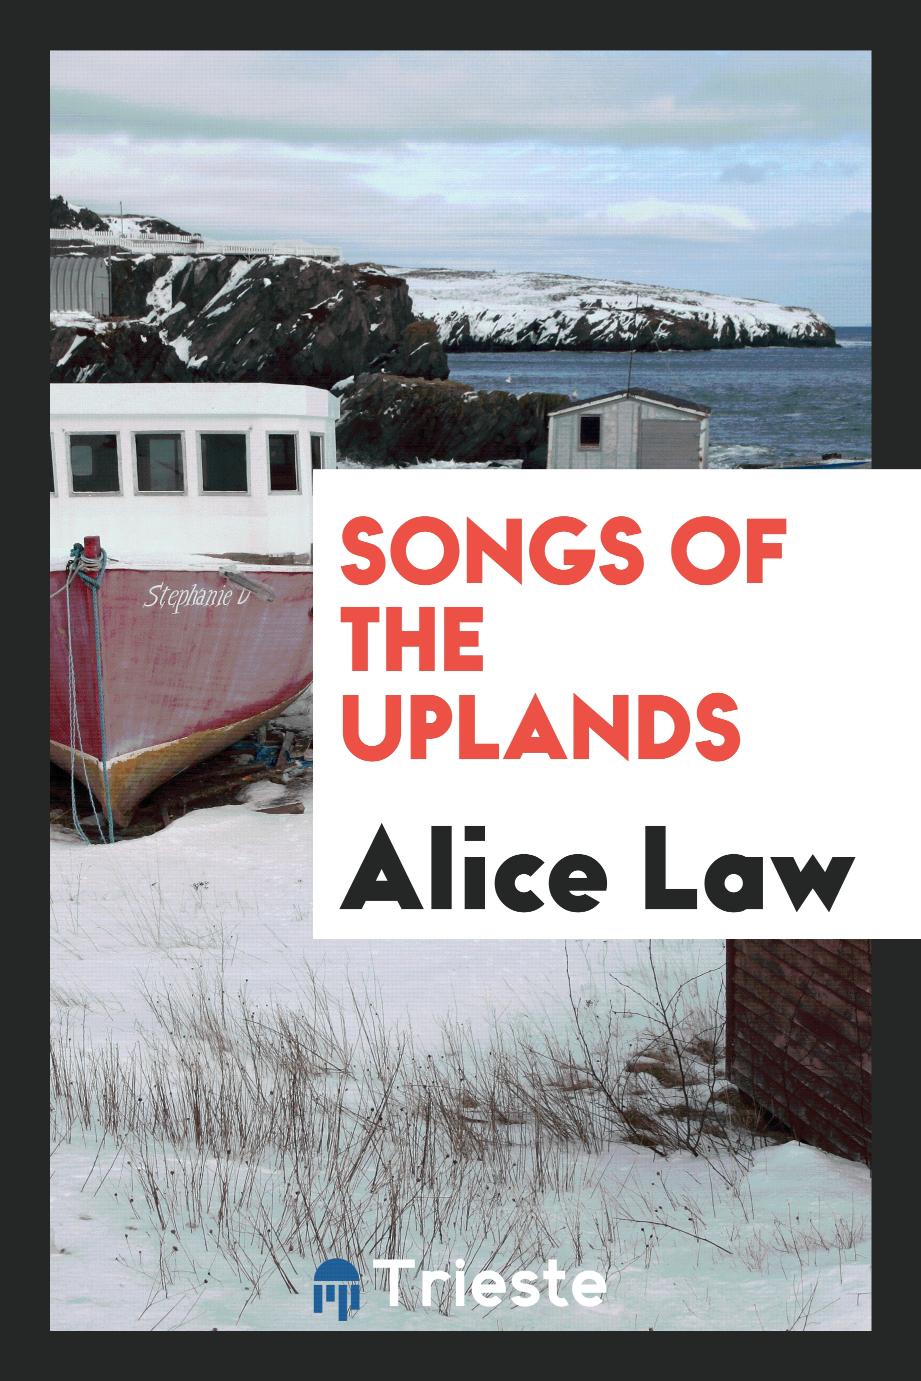 Songs of the uplands